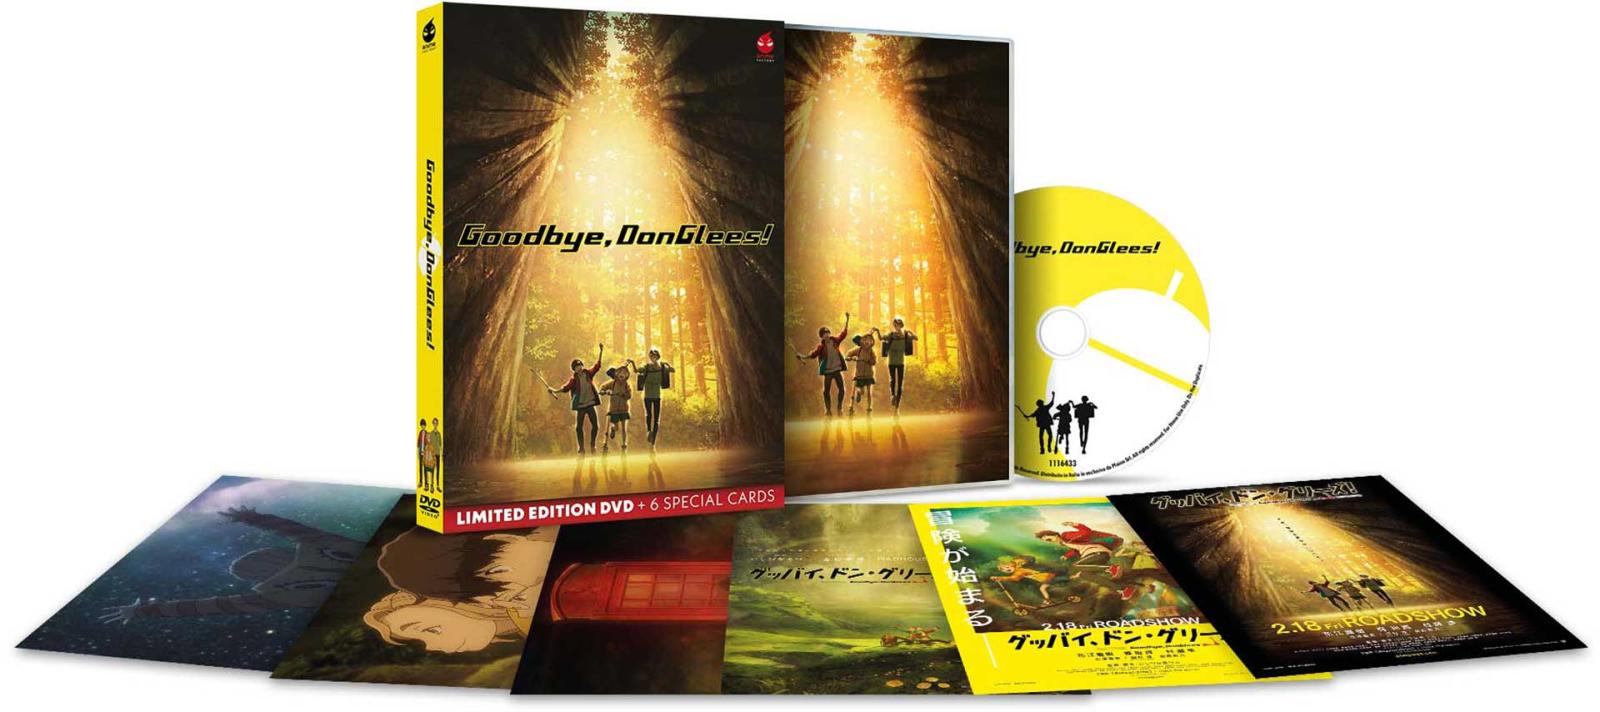 Goodbye, DonGless! - Limited Edition DVD + 6 Special Cards (DVD) Image 3